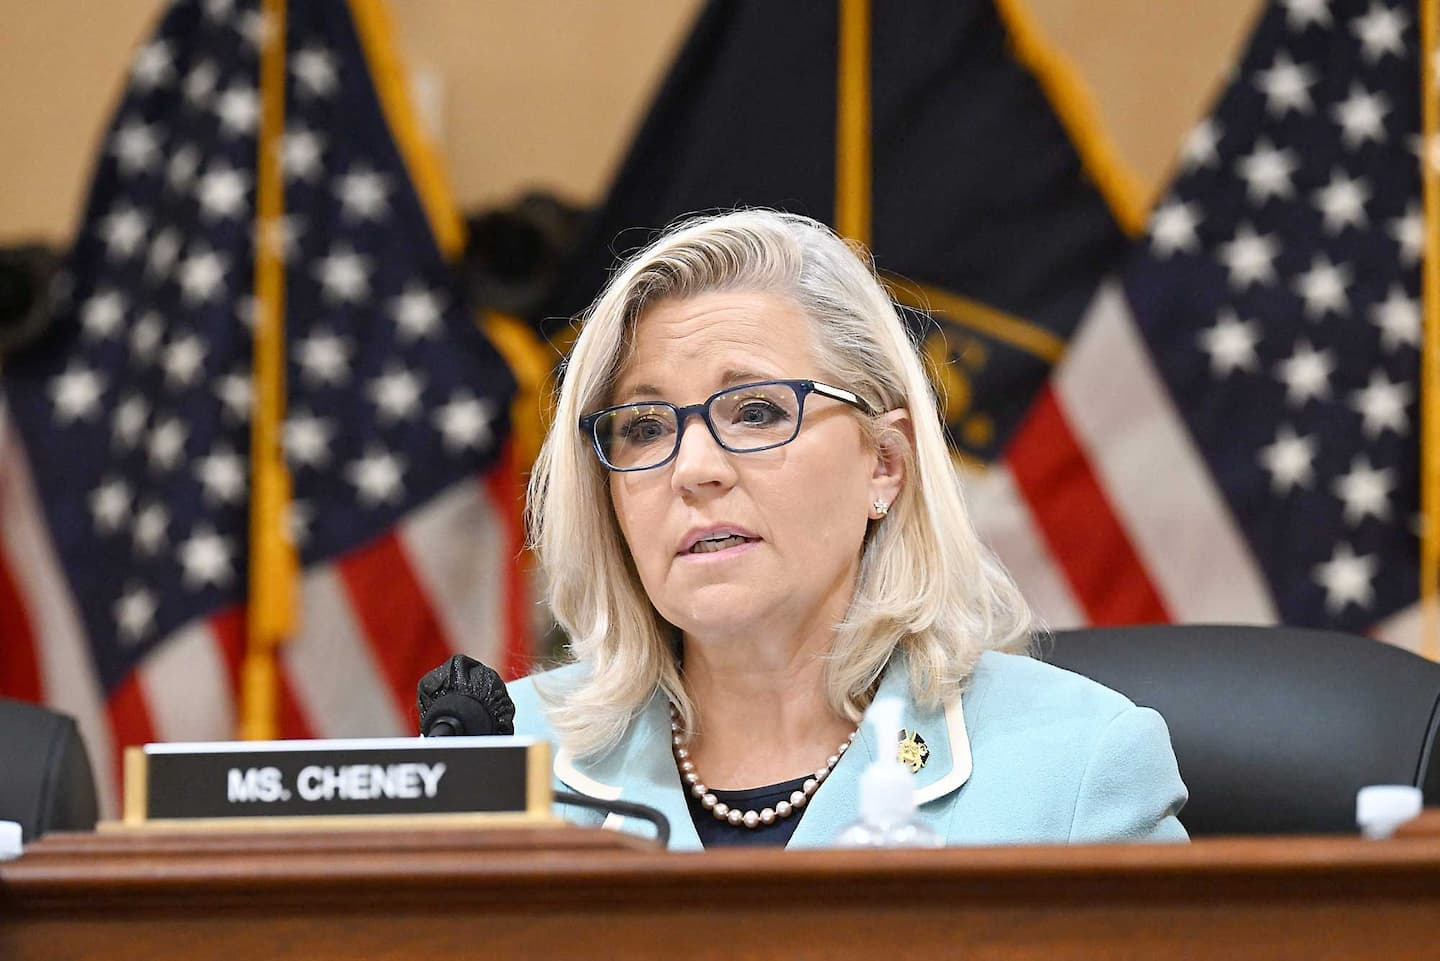 Liz Cheney: The Loneliness of Courage